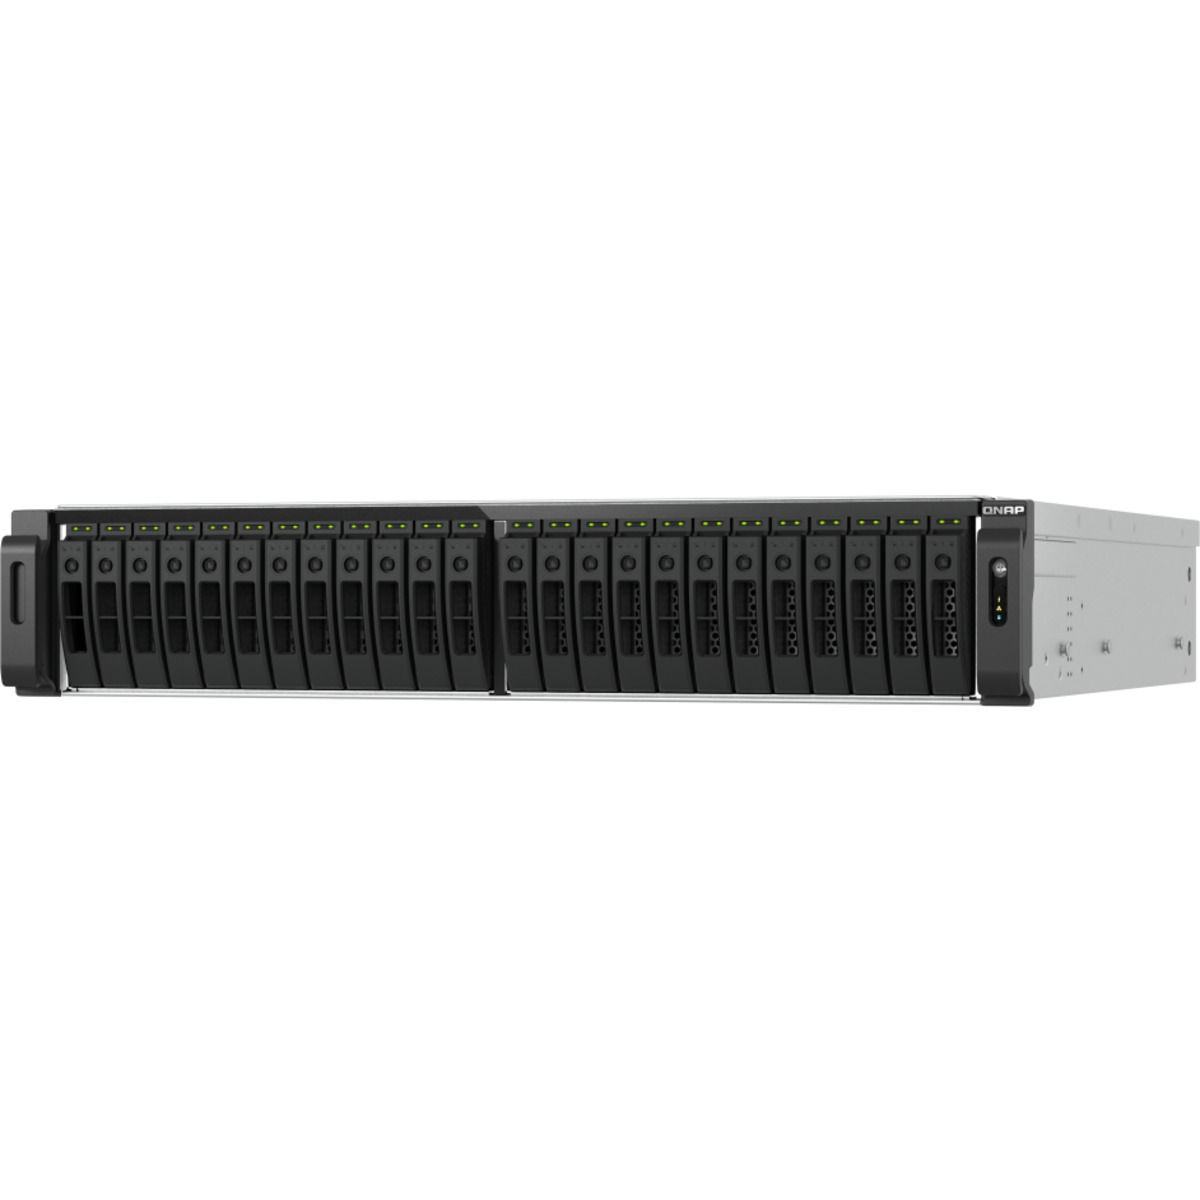 QNAP TS-h3077AFU Ryzen 7 All-Flash ZFS 12.5tb 30-Bay RackMount Large Business / Enterprise NAS - Network Attached Storage Device 25x500gb Sandisk Ultra 3D SDSSDH3-500G 2.5 560/520MB/s SATA 6Gb/s SSD CONSUMER Class Drives Installed - Burn-In Tested TS-h3077AFU Ryzen 7 All-Flash ZFS